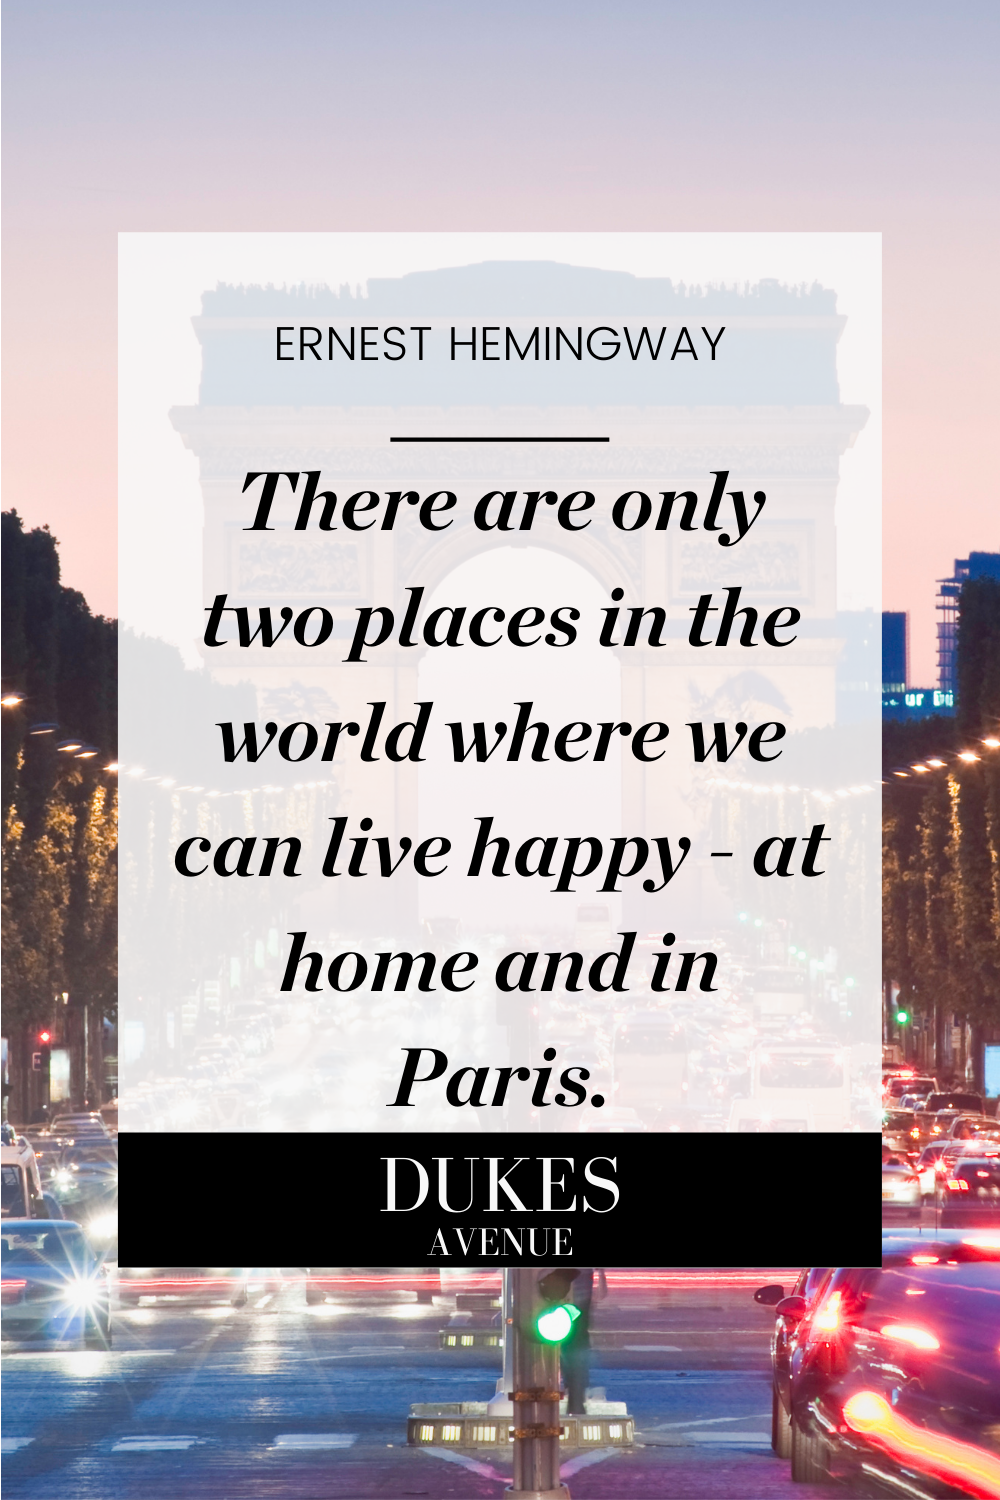 Picture of the Champs Elysees at Night with text overlay of one of Ernest Hemingway's Quotes